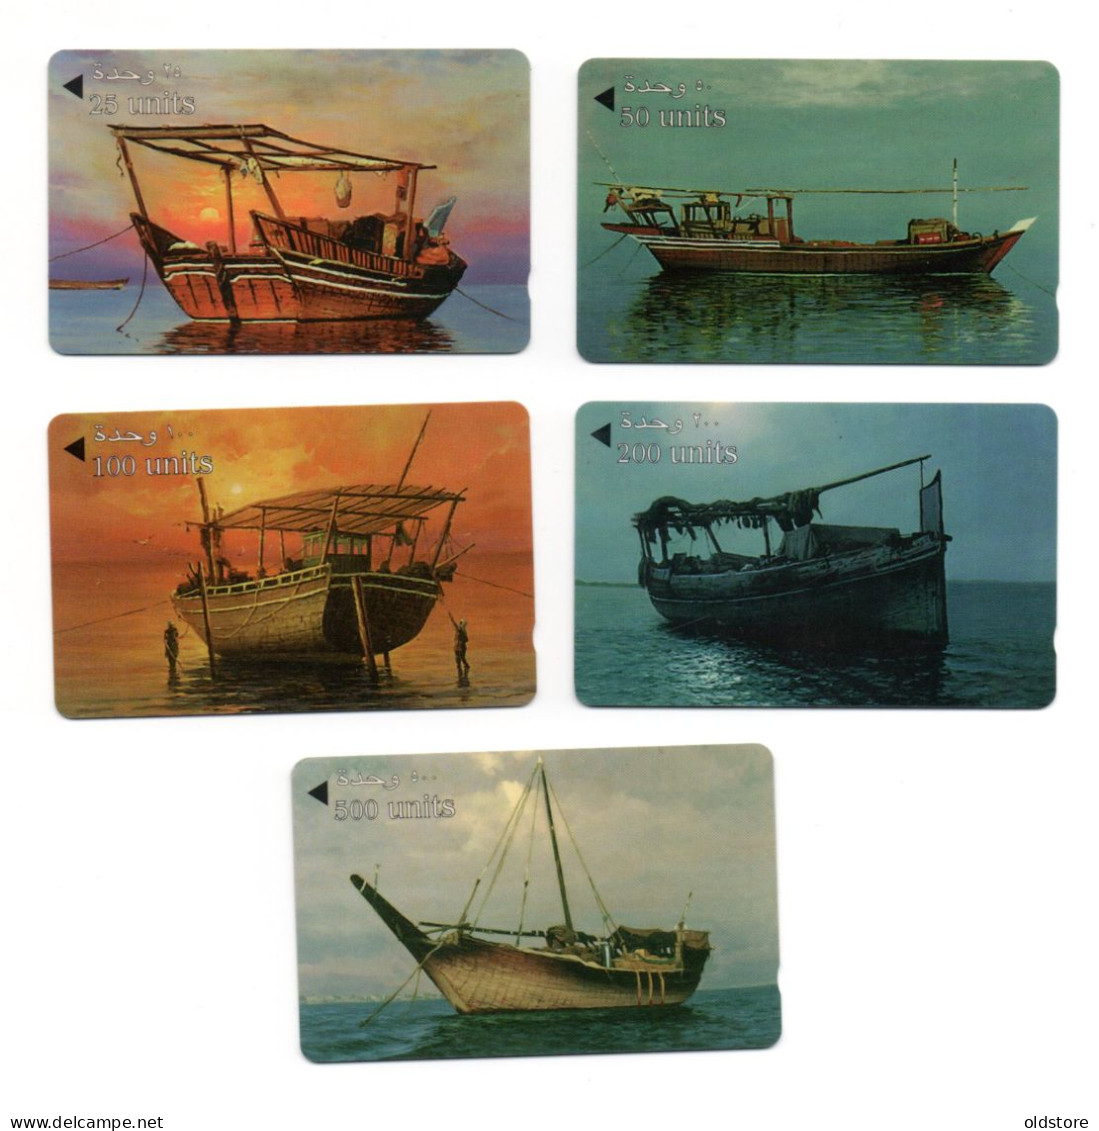 Bahrain Phonecards - Types Of Boats In Bahrain - 5 Cards Complete  Set - ND 1999 - Batelco #2 Used Cards - Bahrain